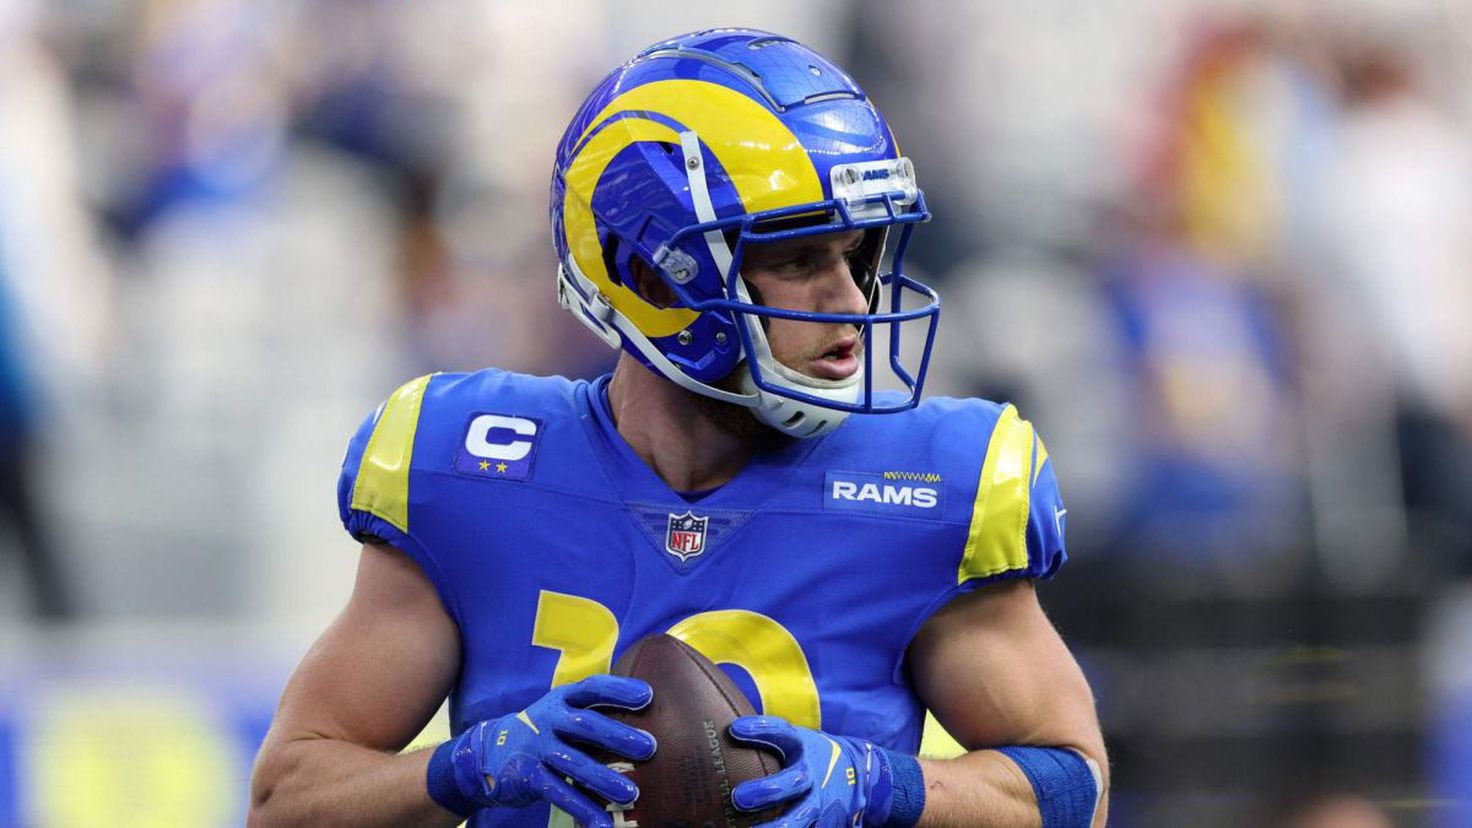 2022 Super Bowl LVI Los Angeles Rams roster: Who are the starters